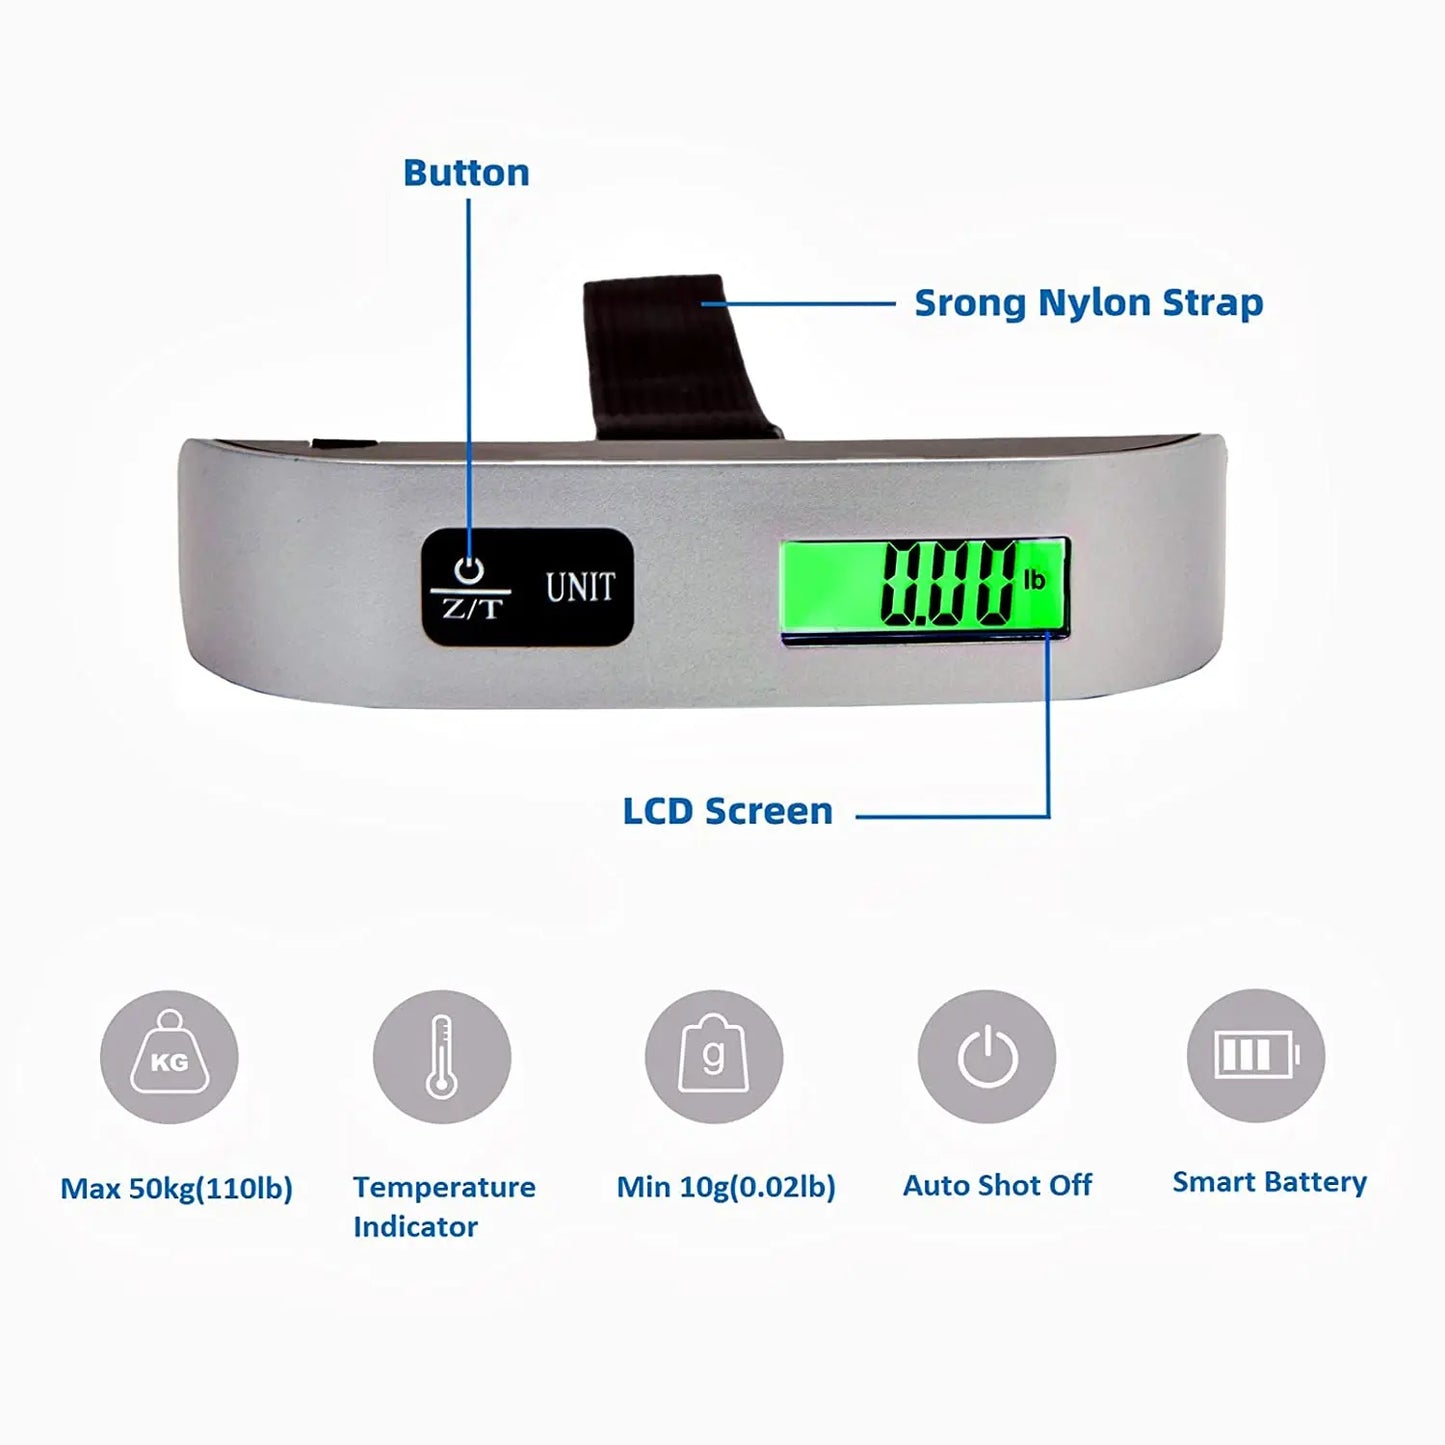 Portable Scale Digital LCD Display 110Lb/50Kg Electronic Luggage Hanging Suitcase Travel Weighs Baggage Bag Weight Balance